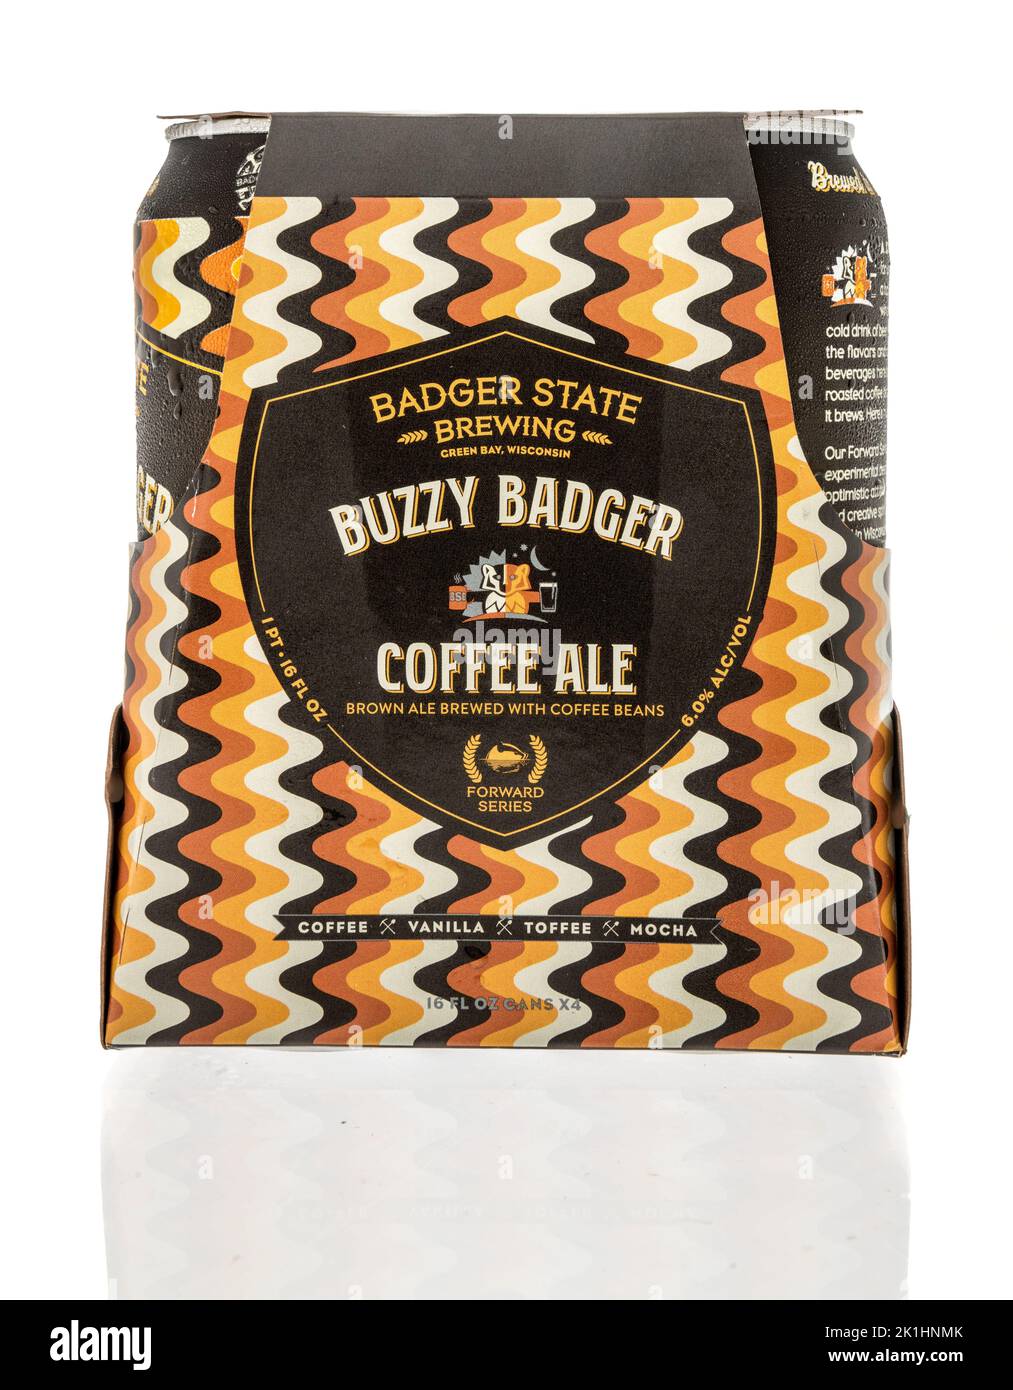 Winneconne, WI - 18 September 2022: A package of Badger state brewing buzzy badger coffee ale beer on an isolated background. Stock Photo